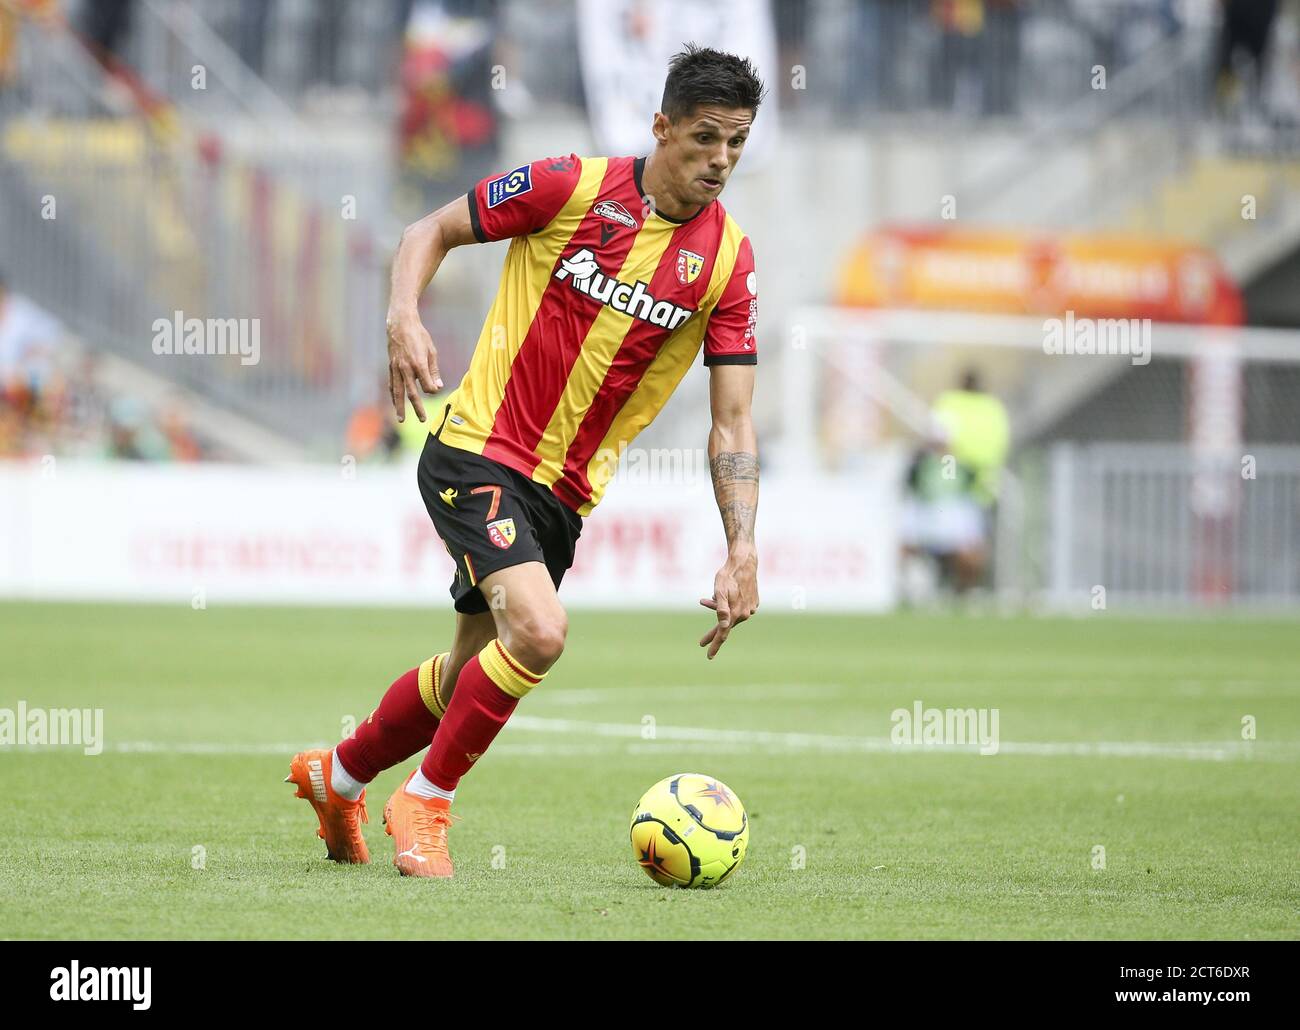 Florian Sotoca of Lens during the French championship Ligue 1 football match between RC Lens and Girondins de Bordeaux on September 19, 2020 at Stade Stock Photo